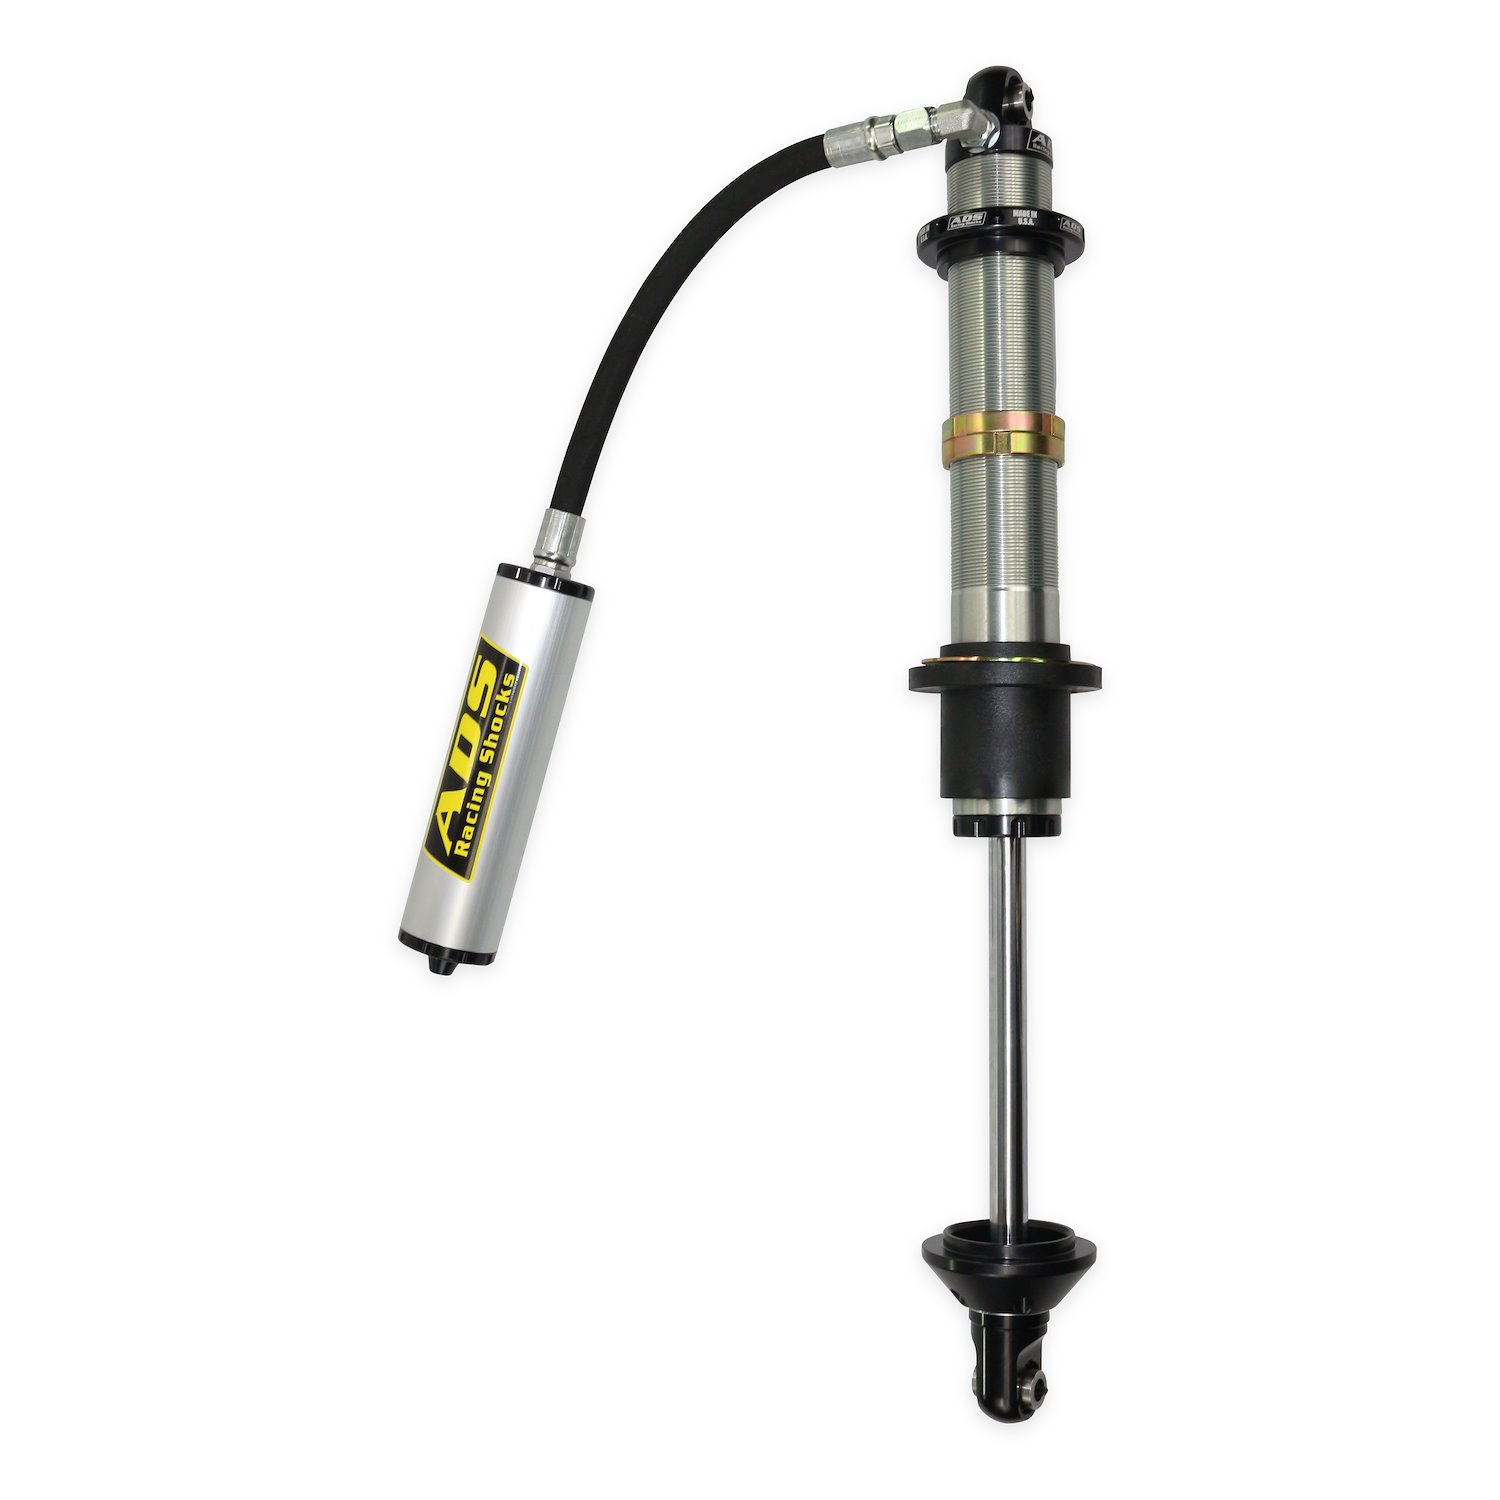 250-COR08-900 Coil-Over Race Shock, 2.5 in. x 8 in. Stroke, w/ Remote Reservoir (90-Degree Hose)